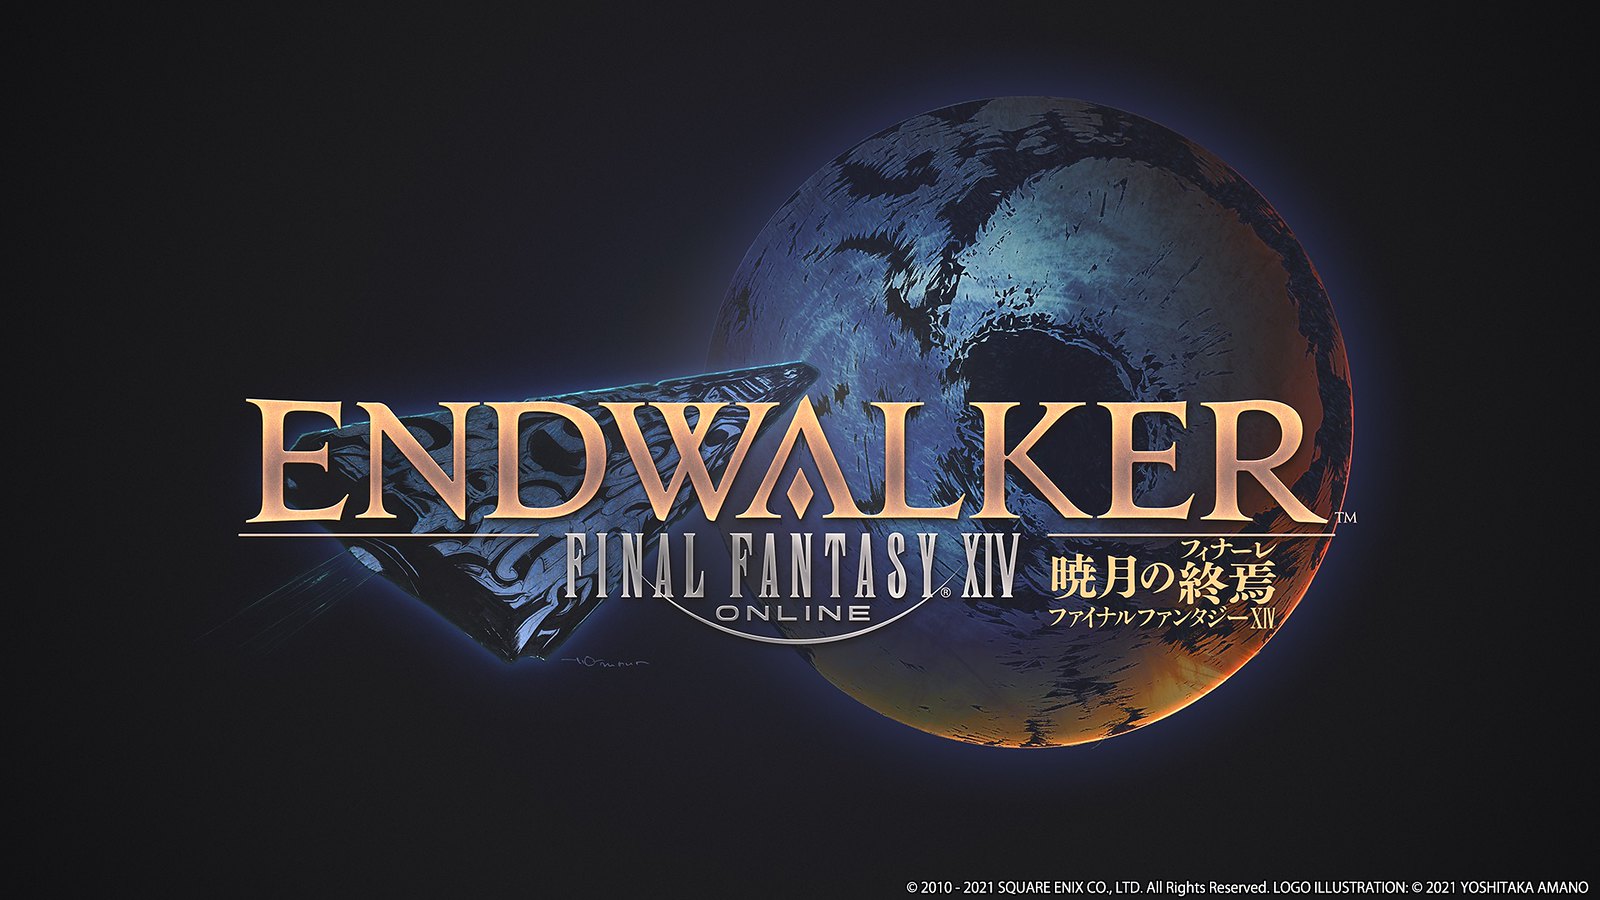 Endwalker, Final Fantasy XIV Online’s next expansion, is coming Fall 2021 to PS5 and PS4